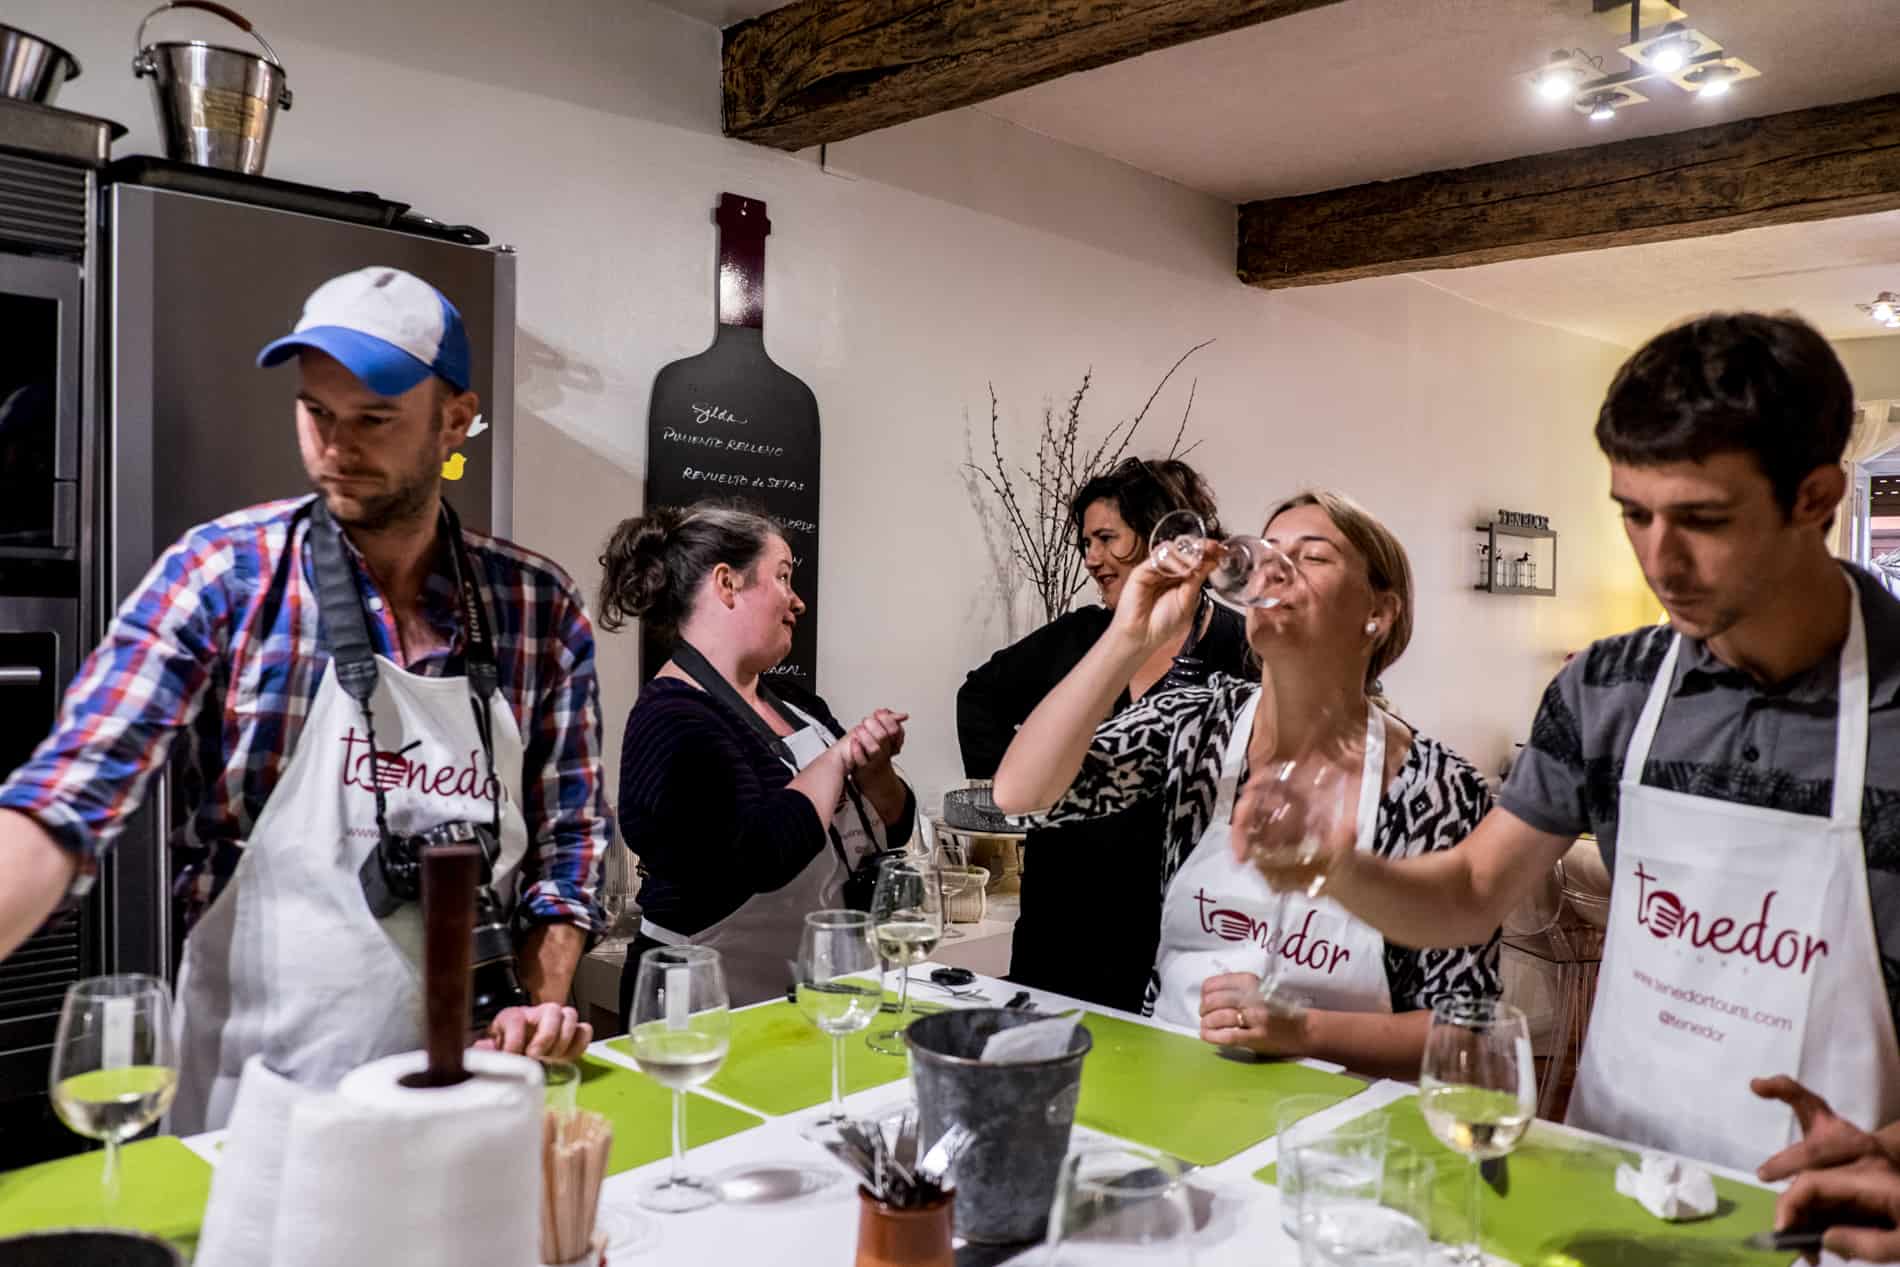 A group prepares food on green chopping boards, while drinking wine during a Pintxos cooking class. 